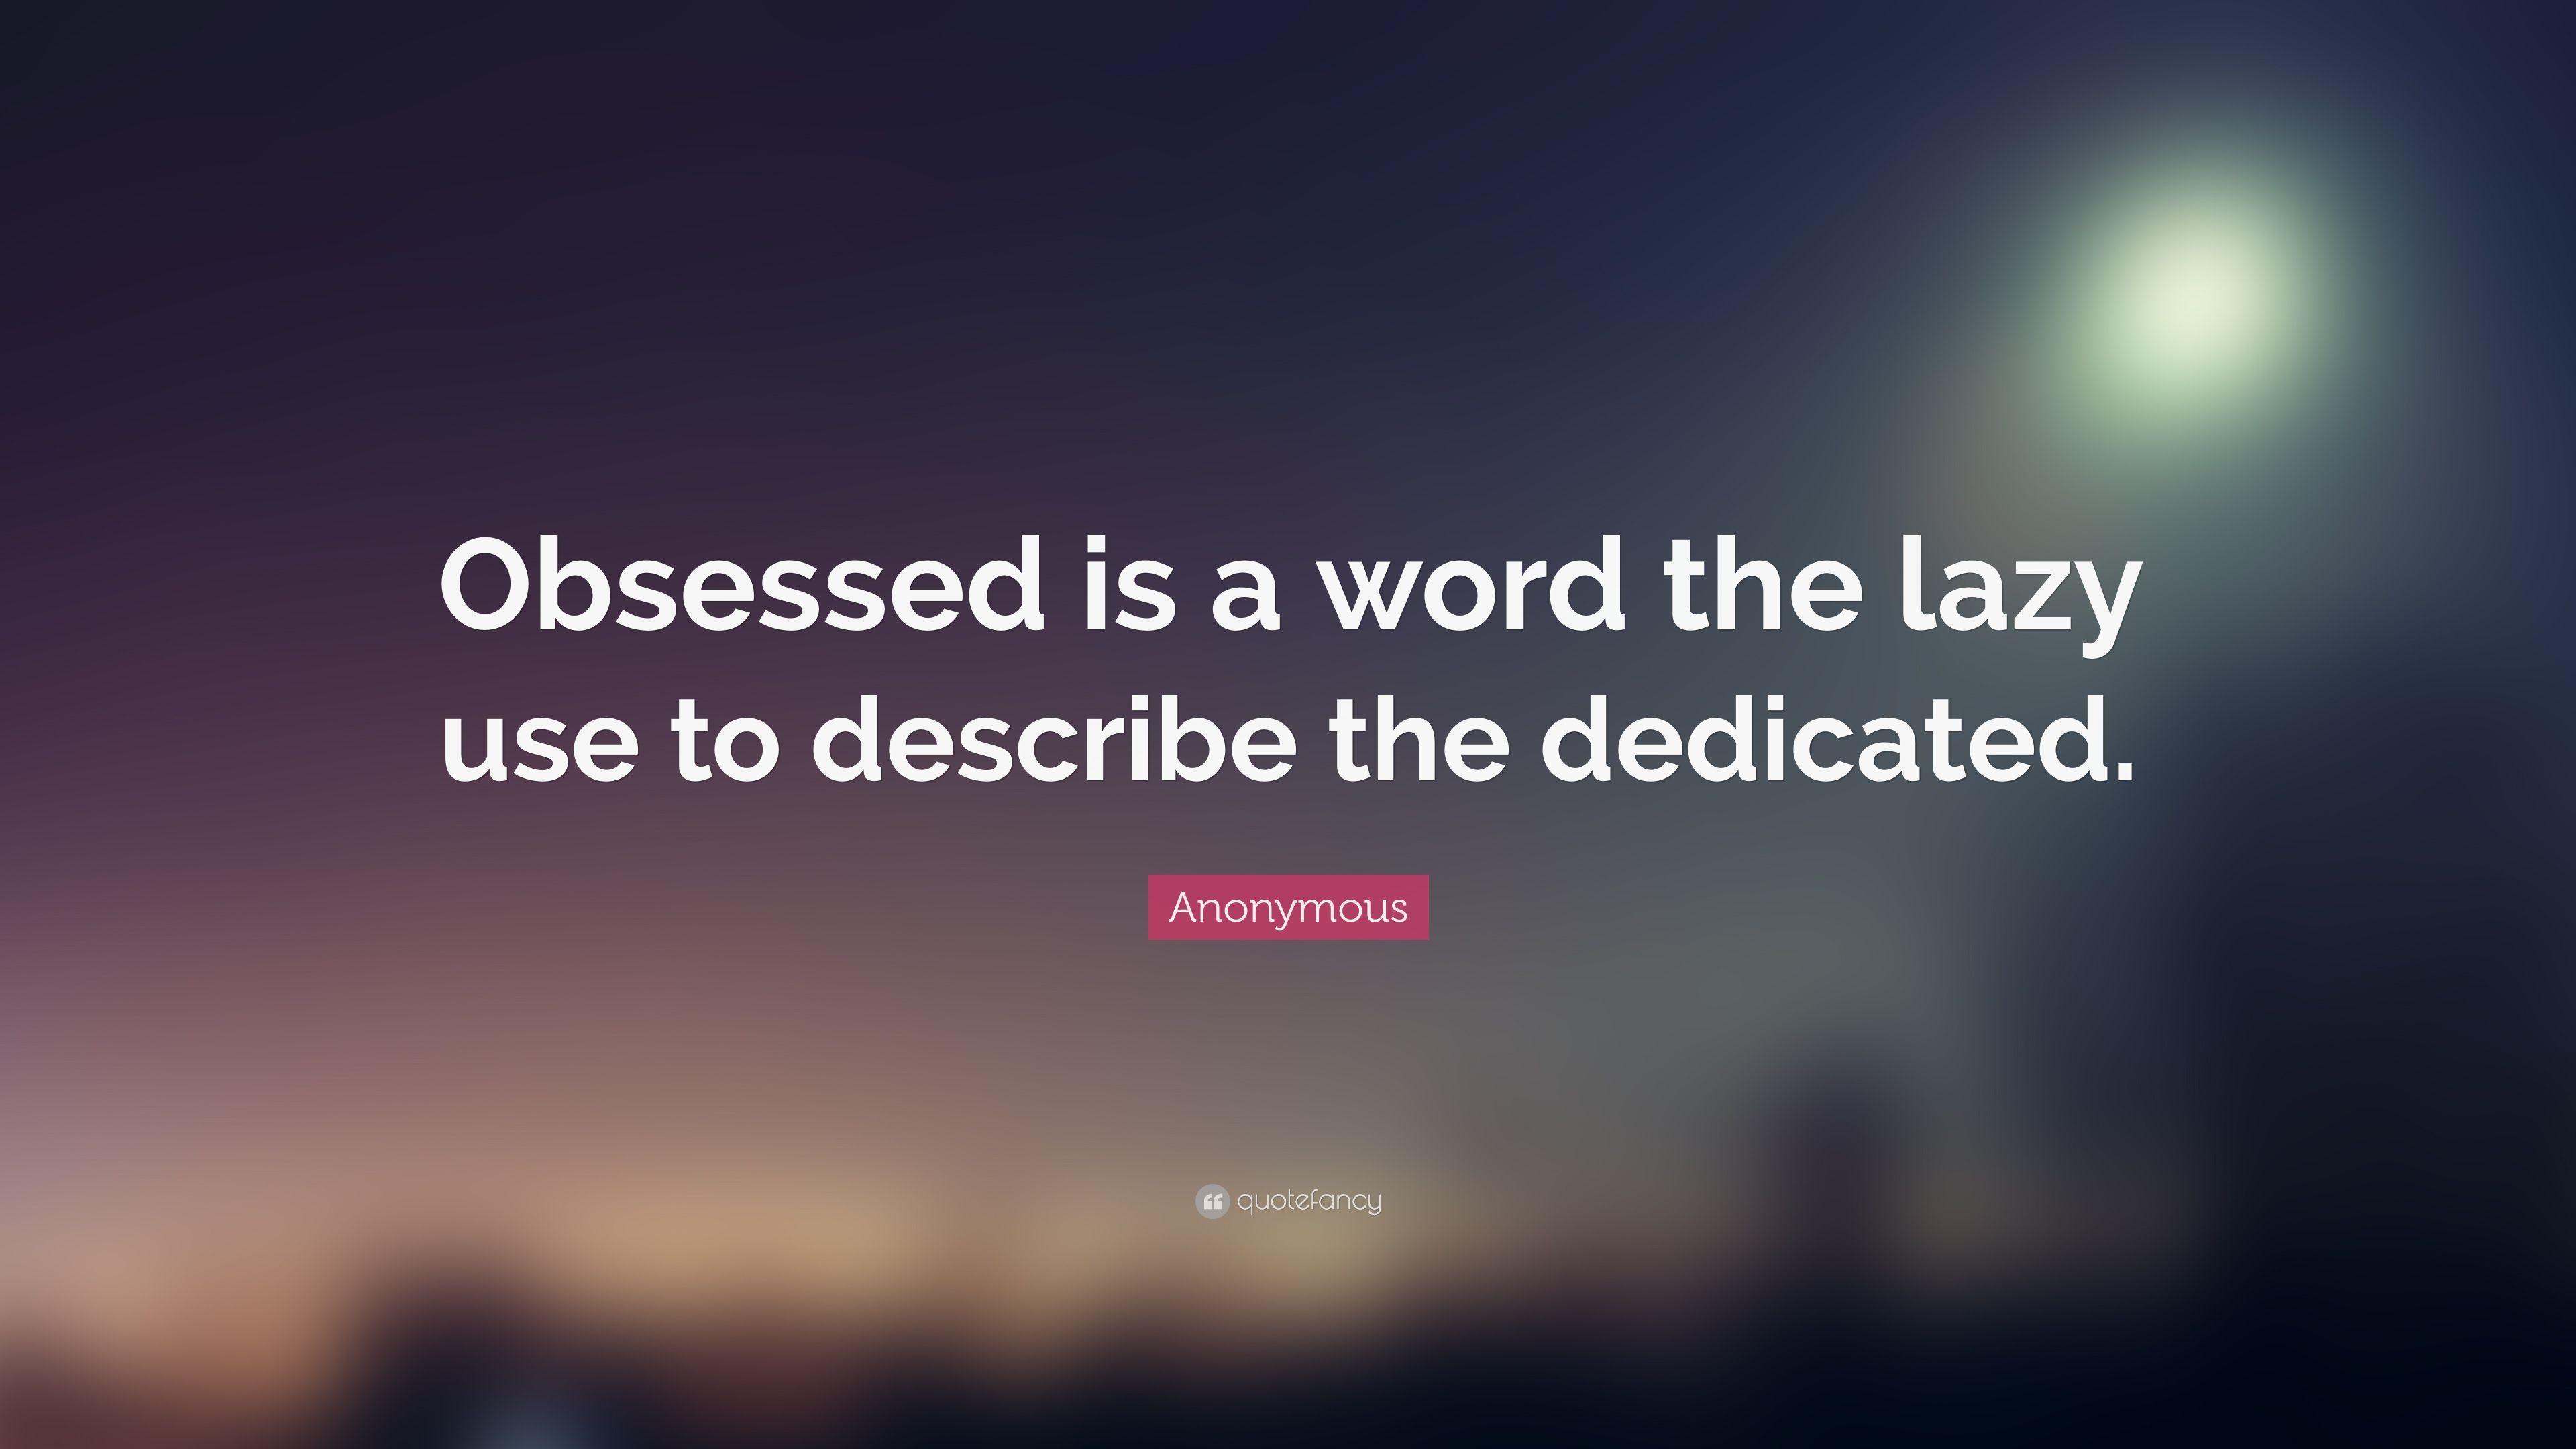 Anonymous Quote: “Obsessed is a word the lazy use to describe